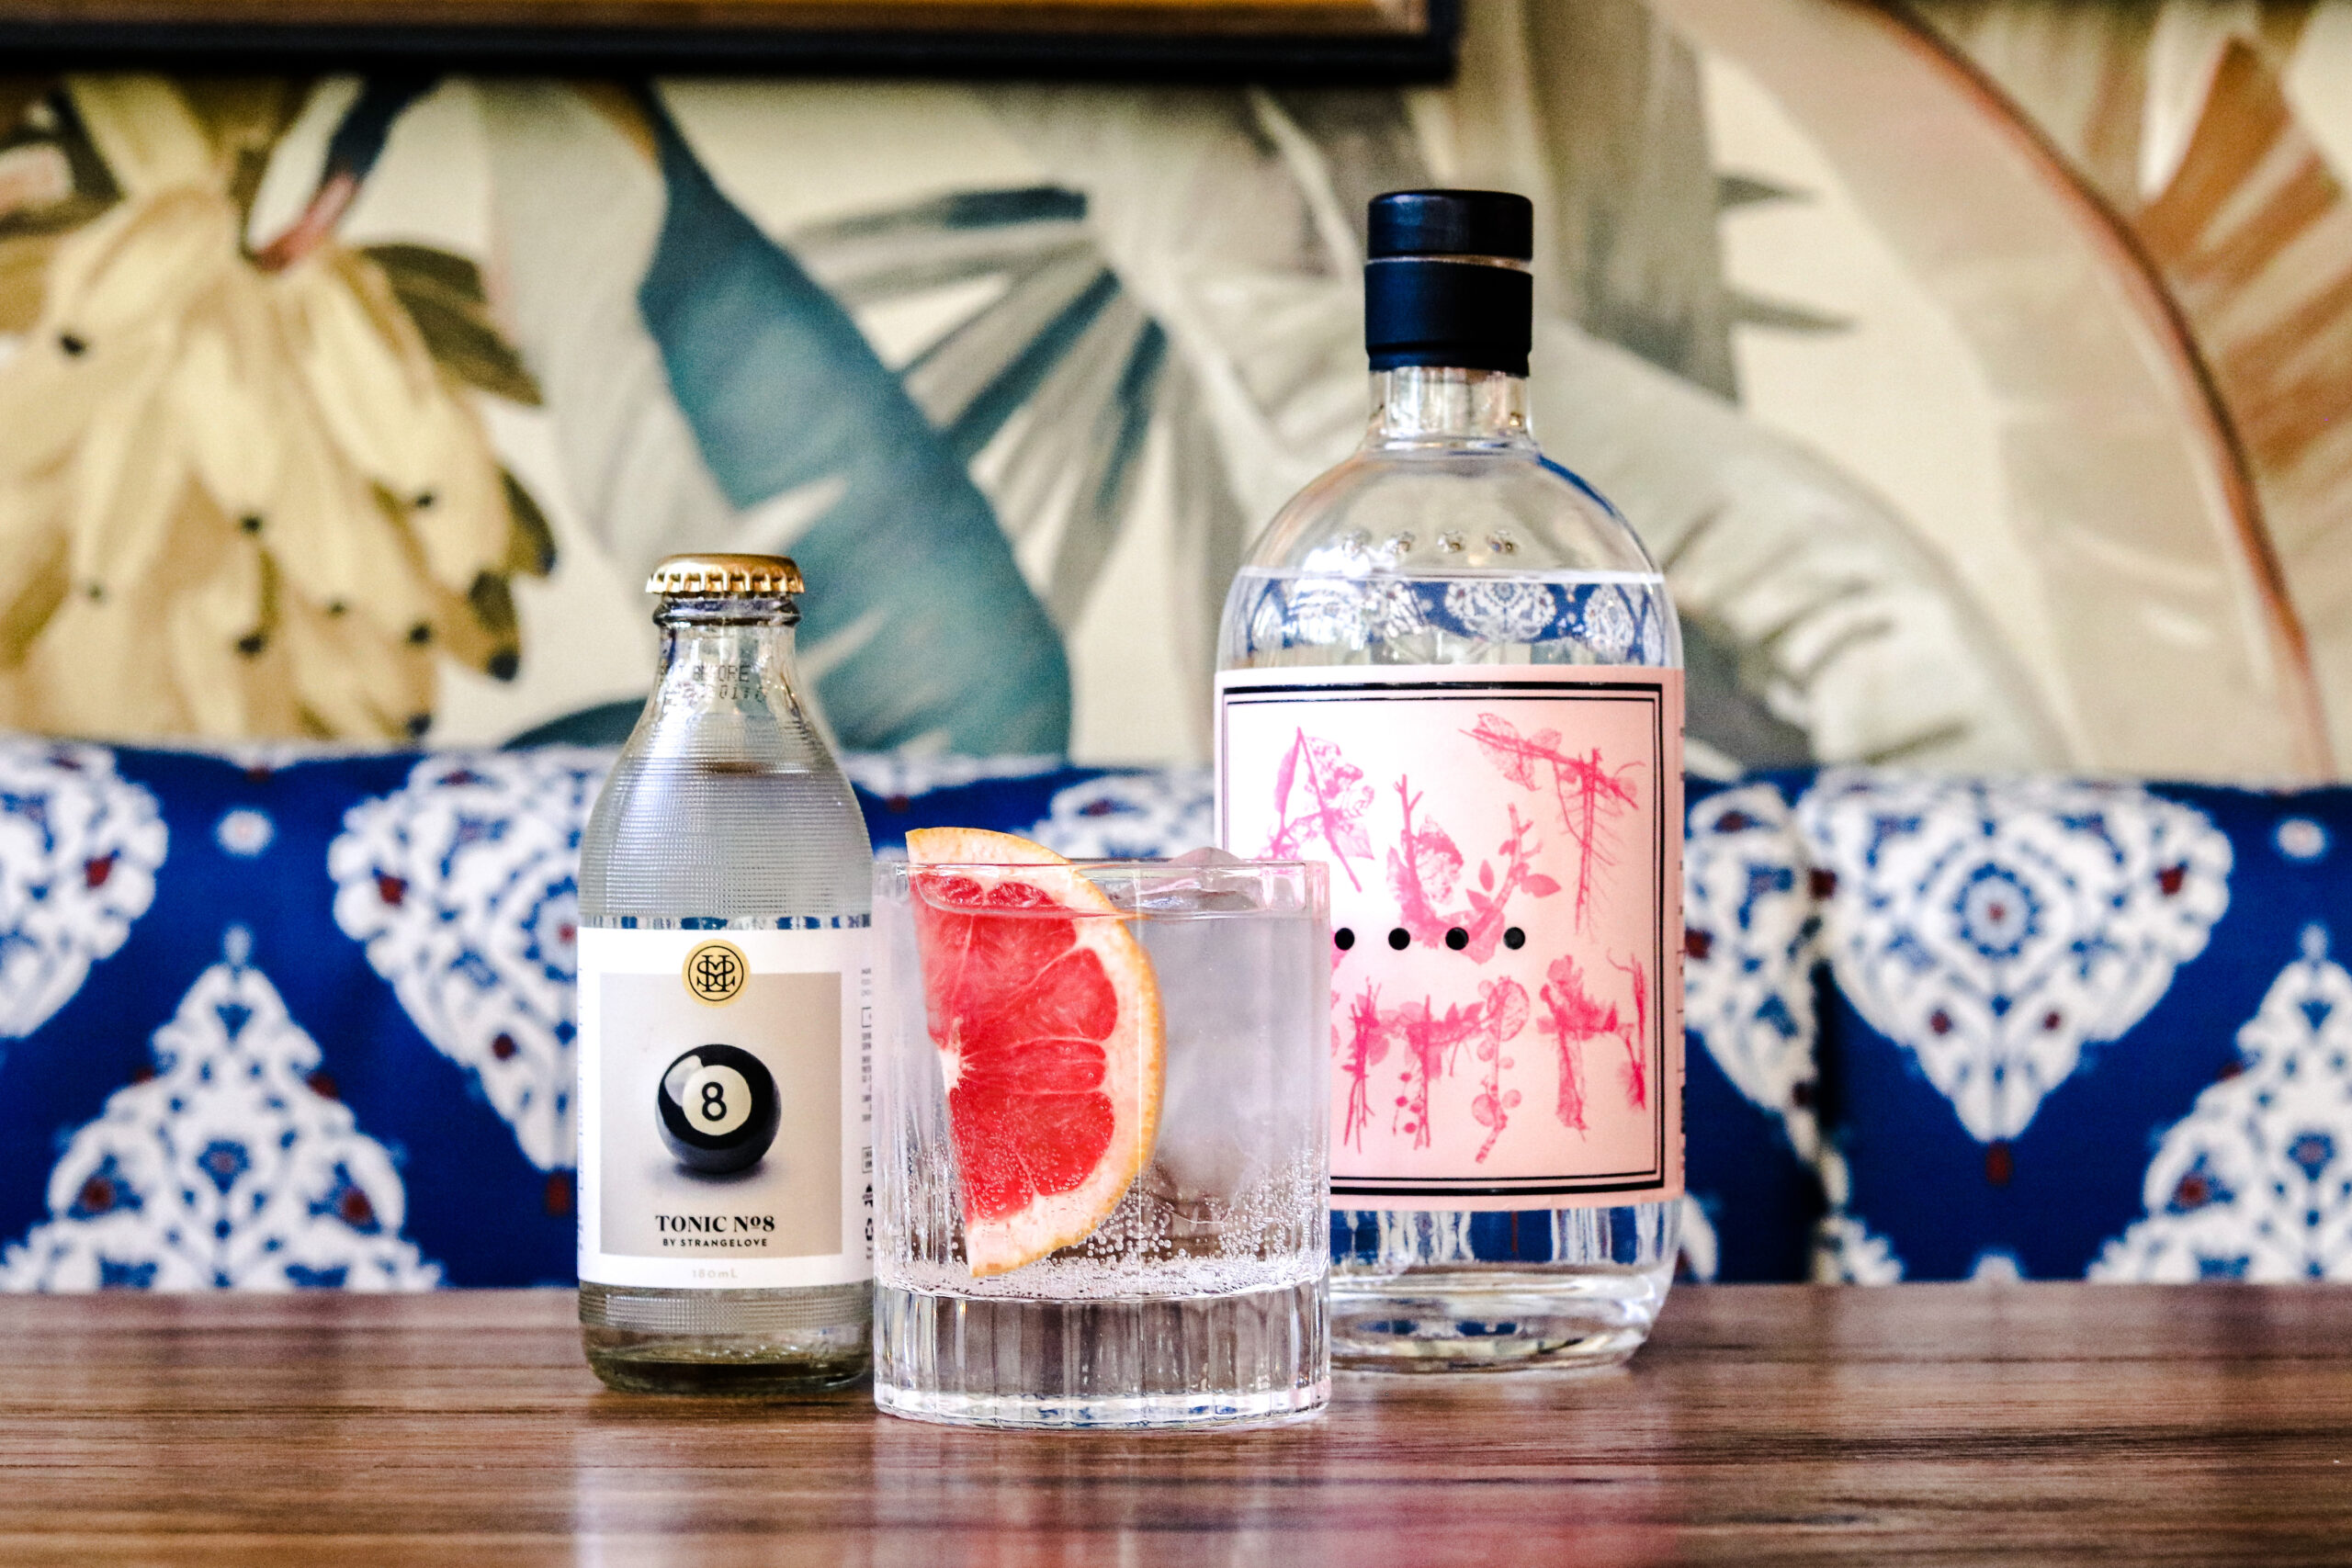 World Gin Week at Forrester's